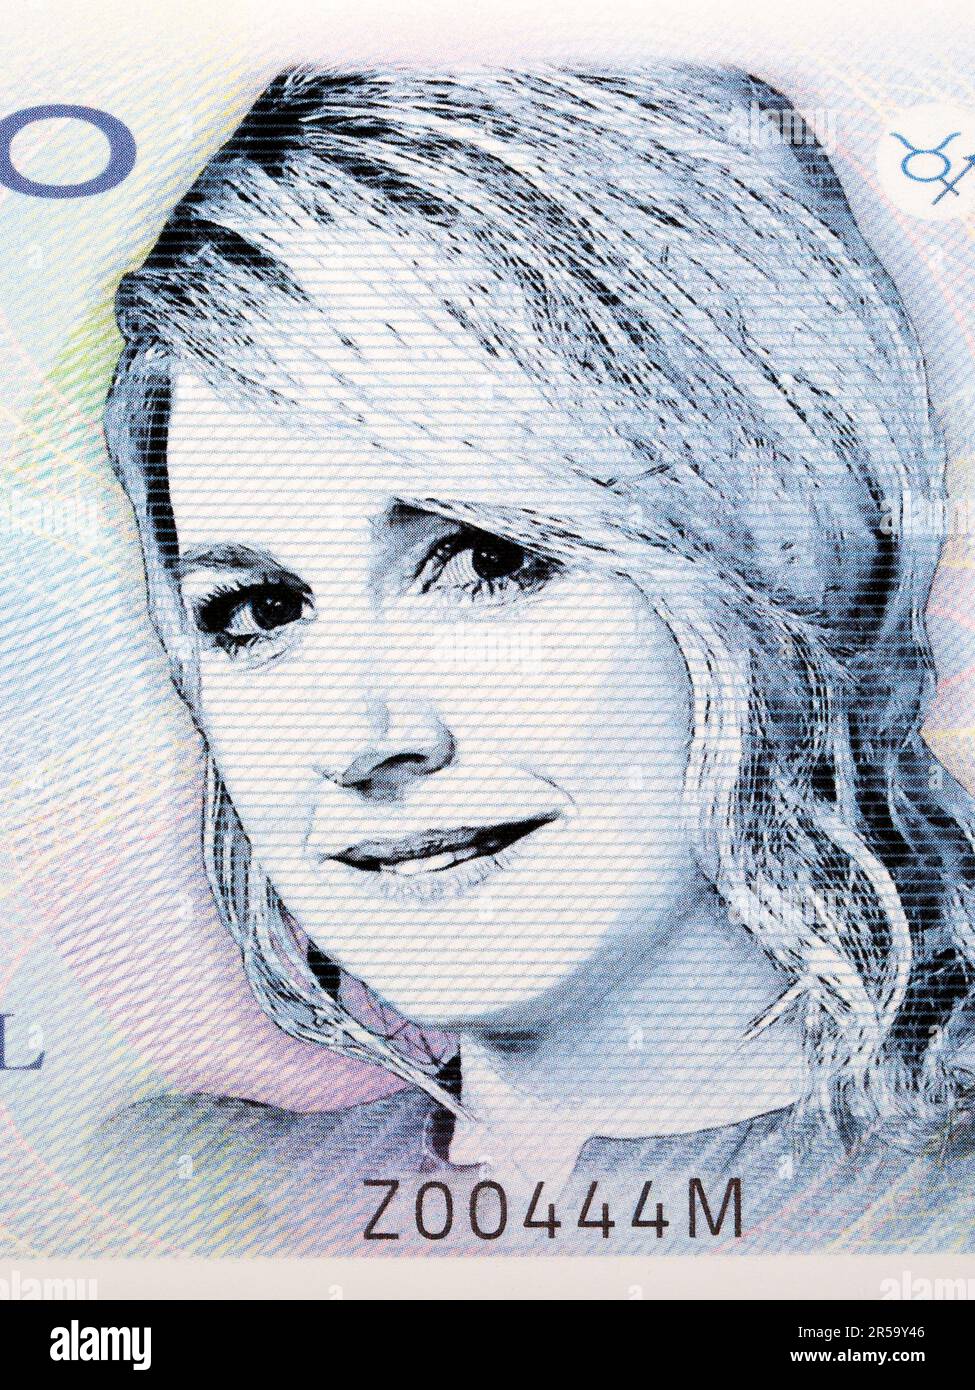 Queen Maxima of the Netherlands a portrait from money Stock Photo